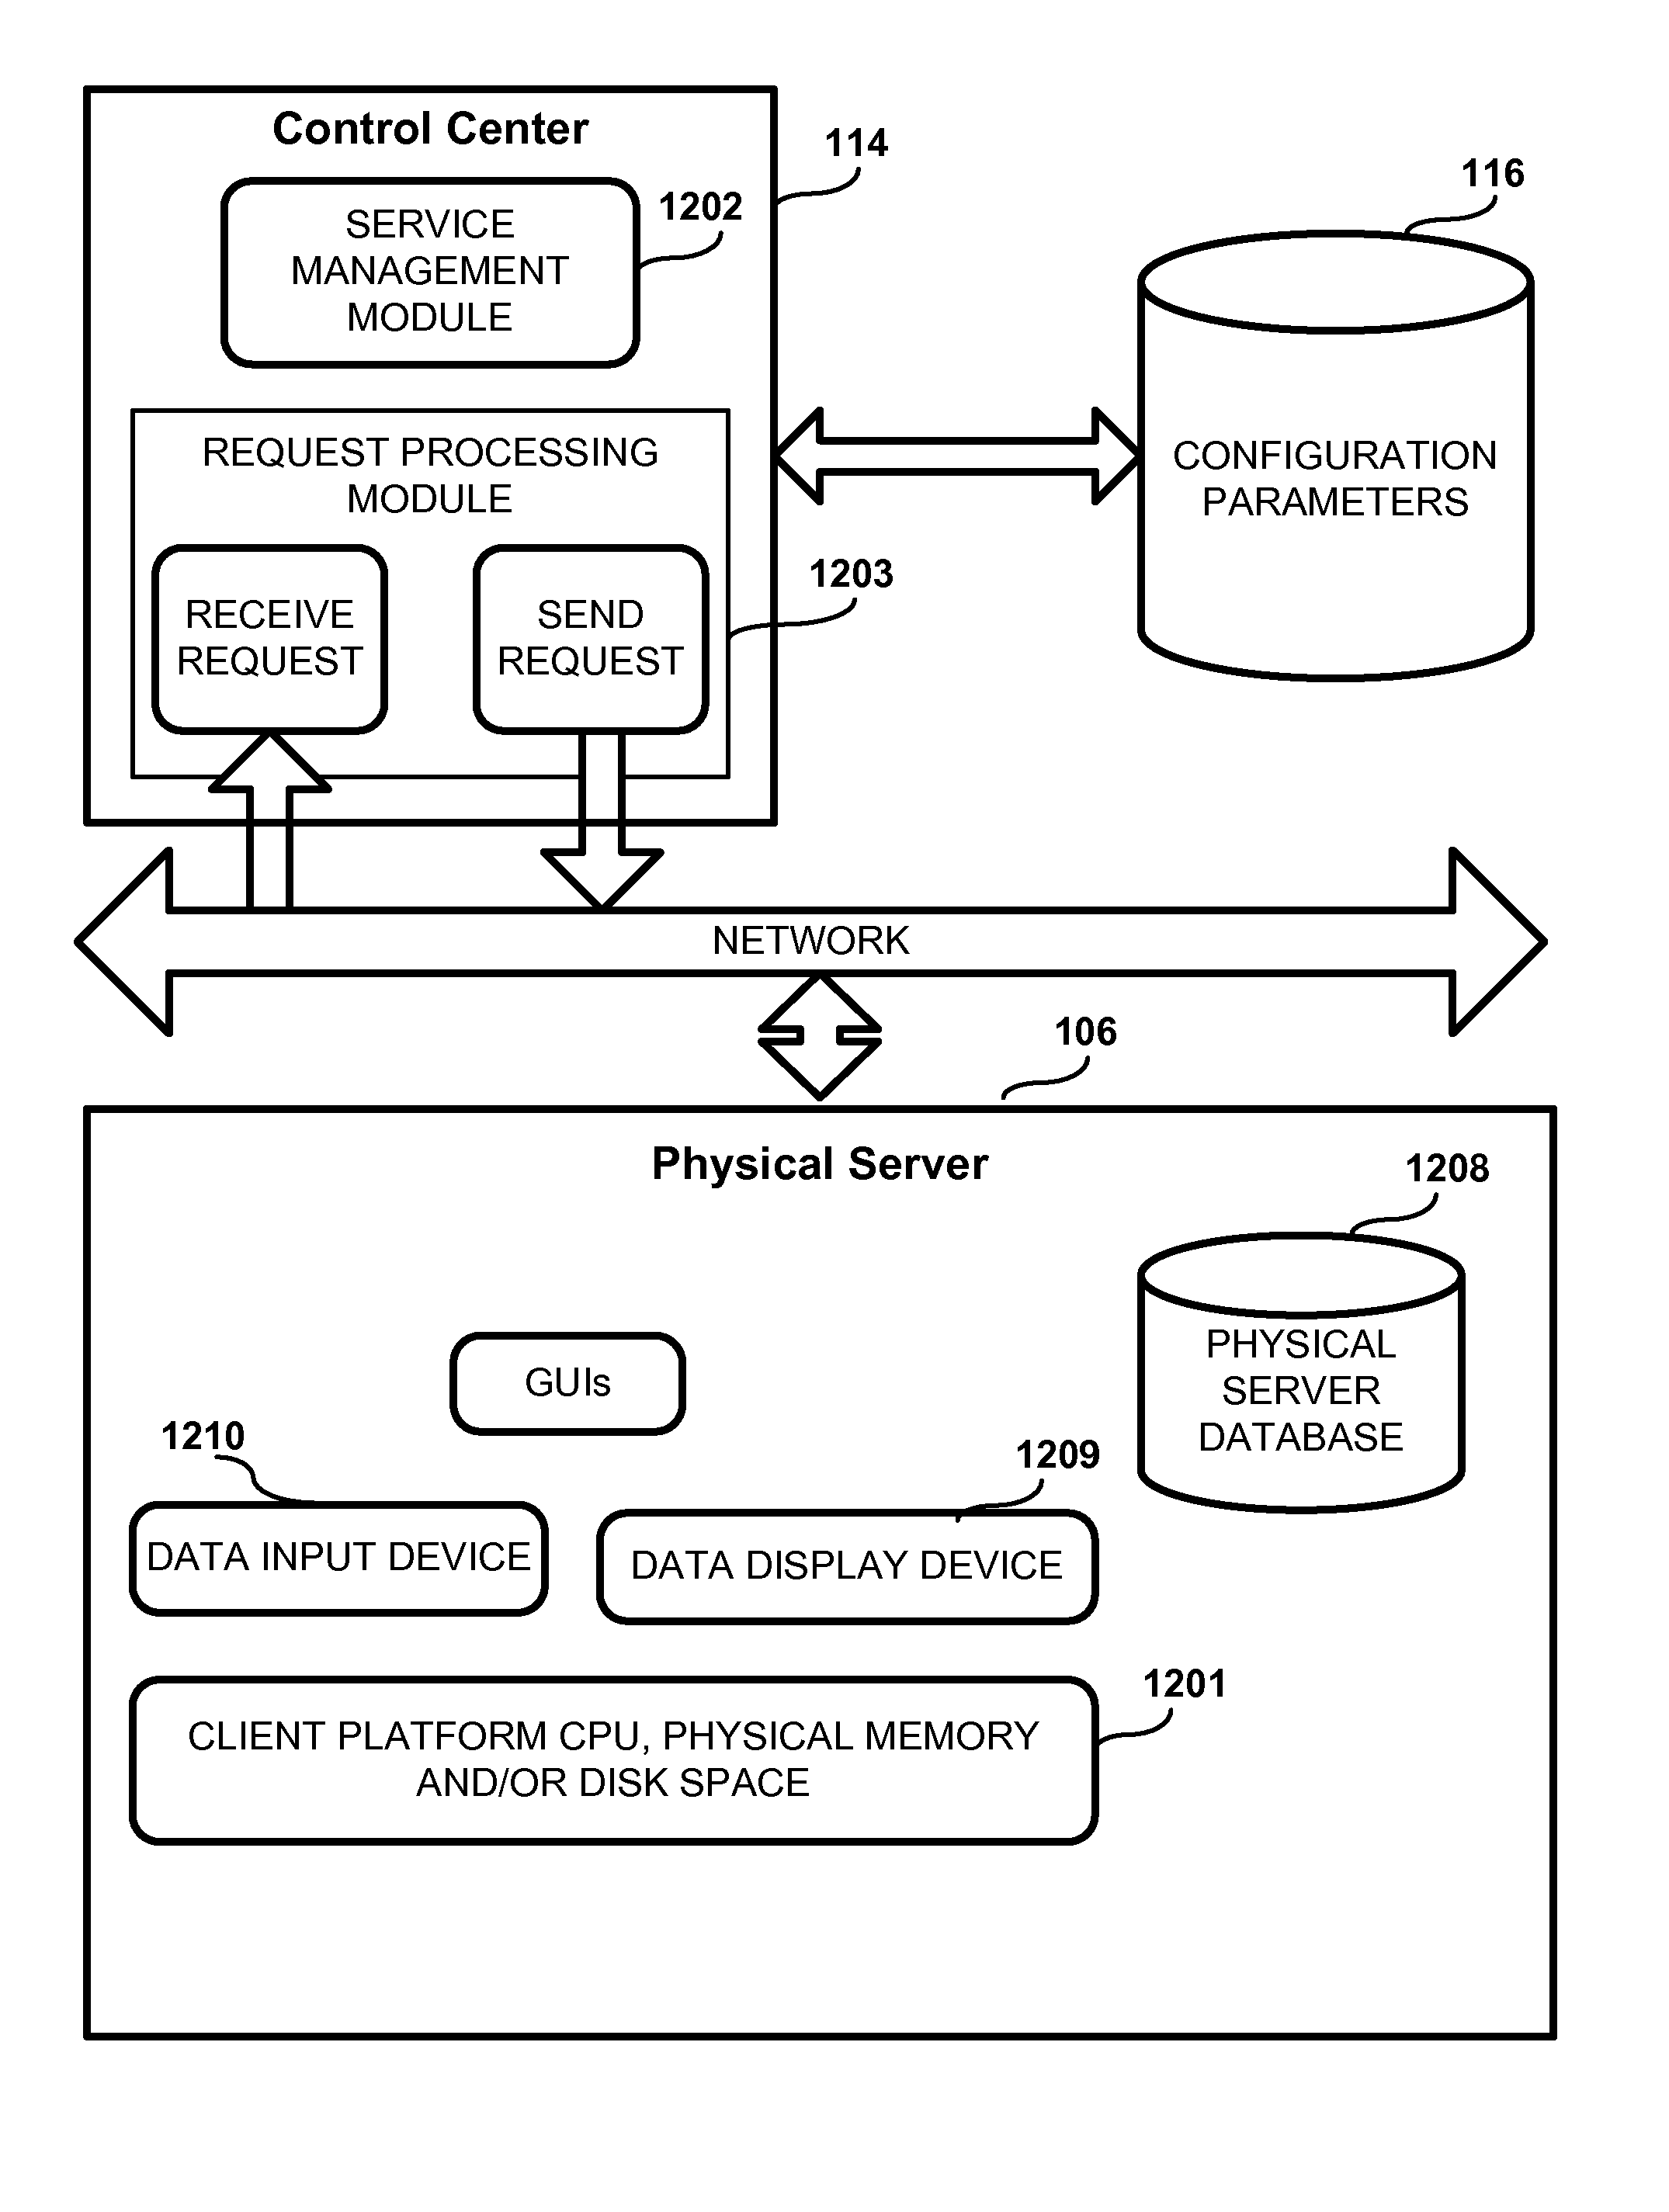 Management of virtual and physical servers using graphic control panels